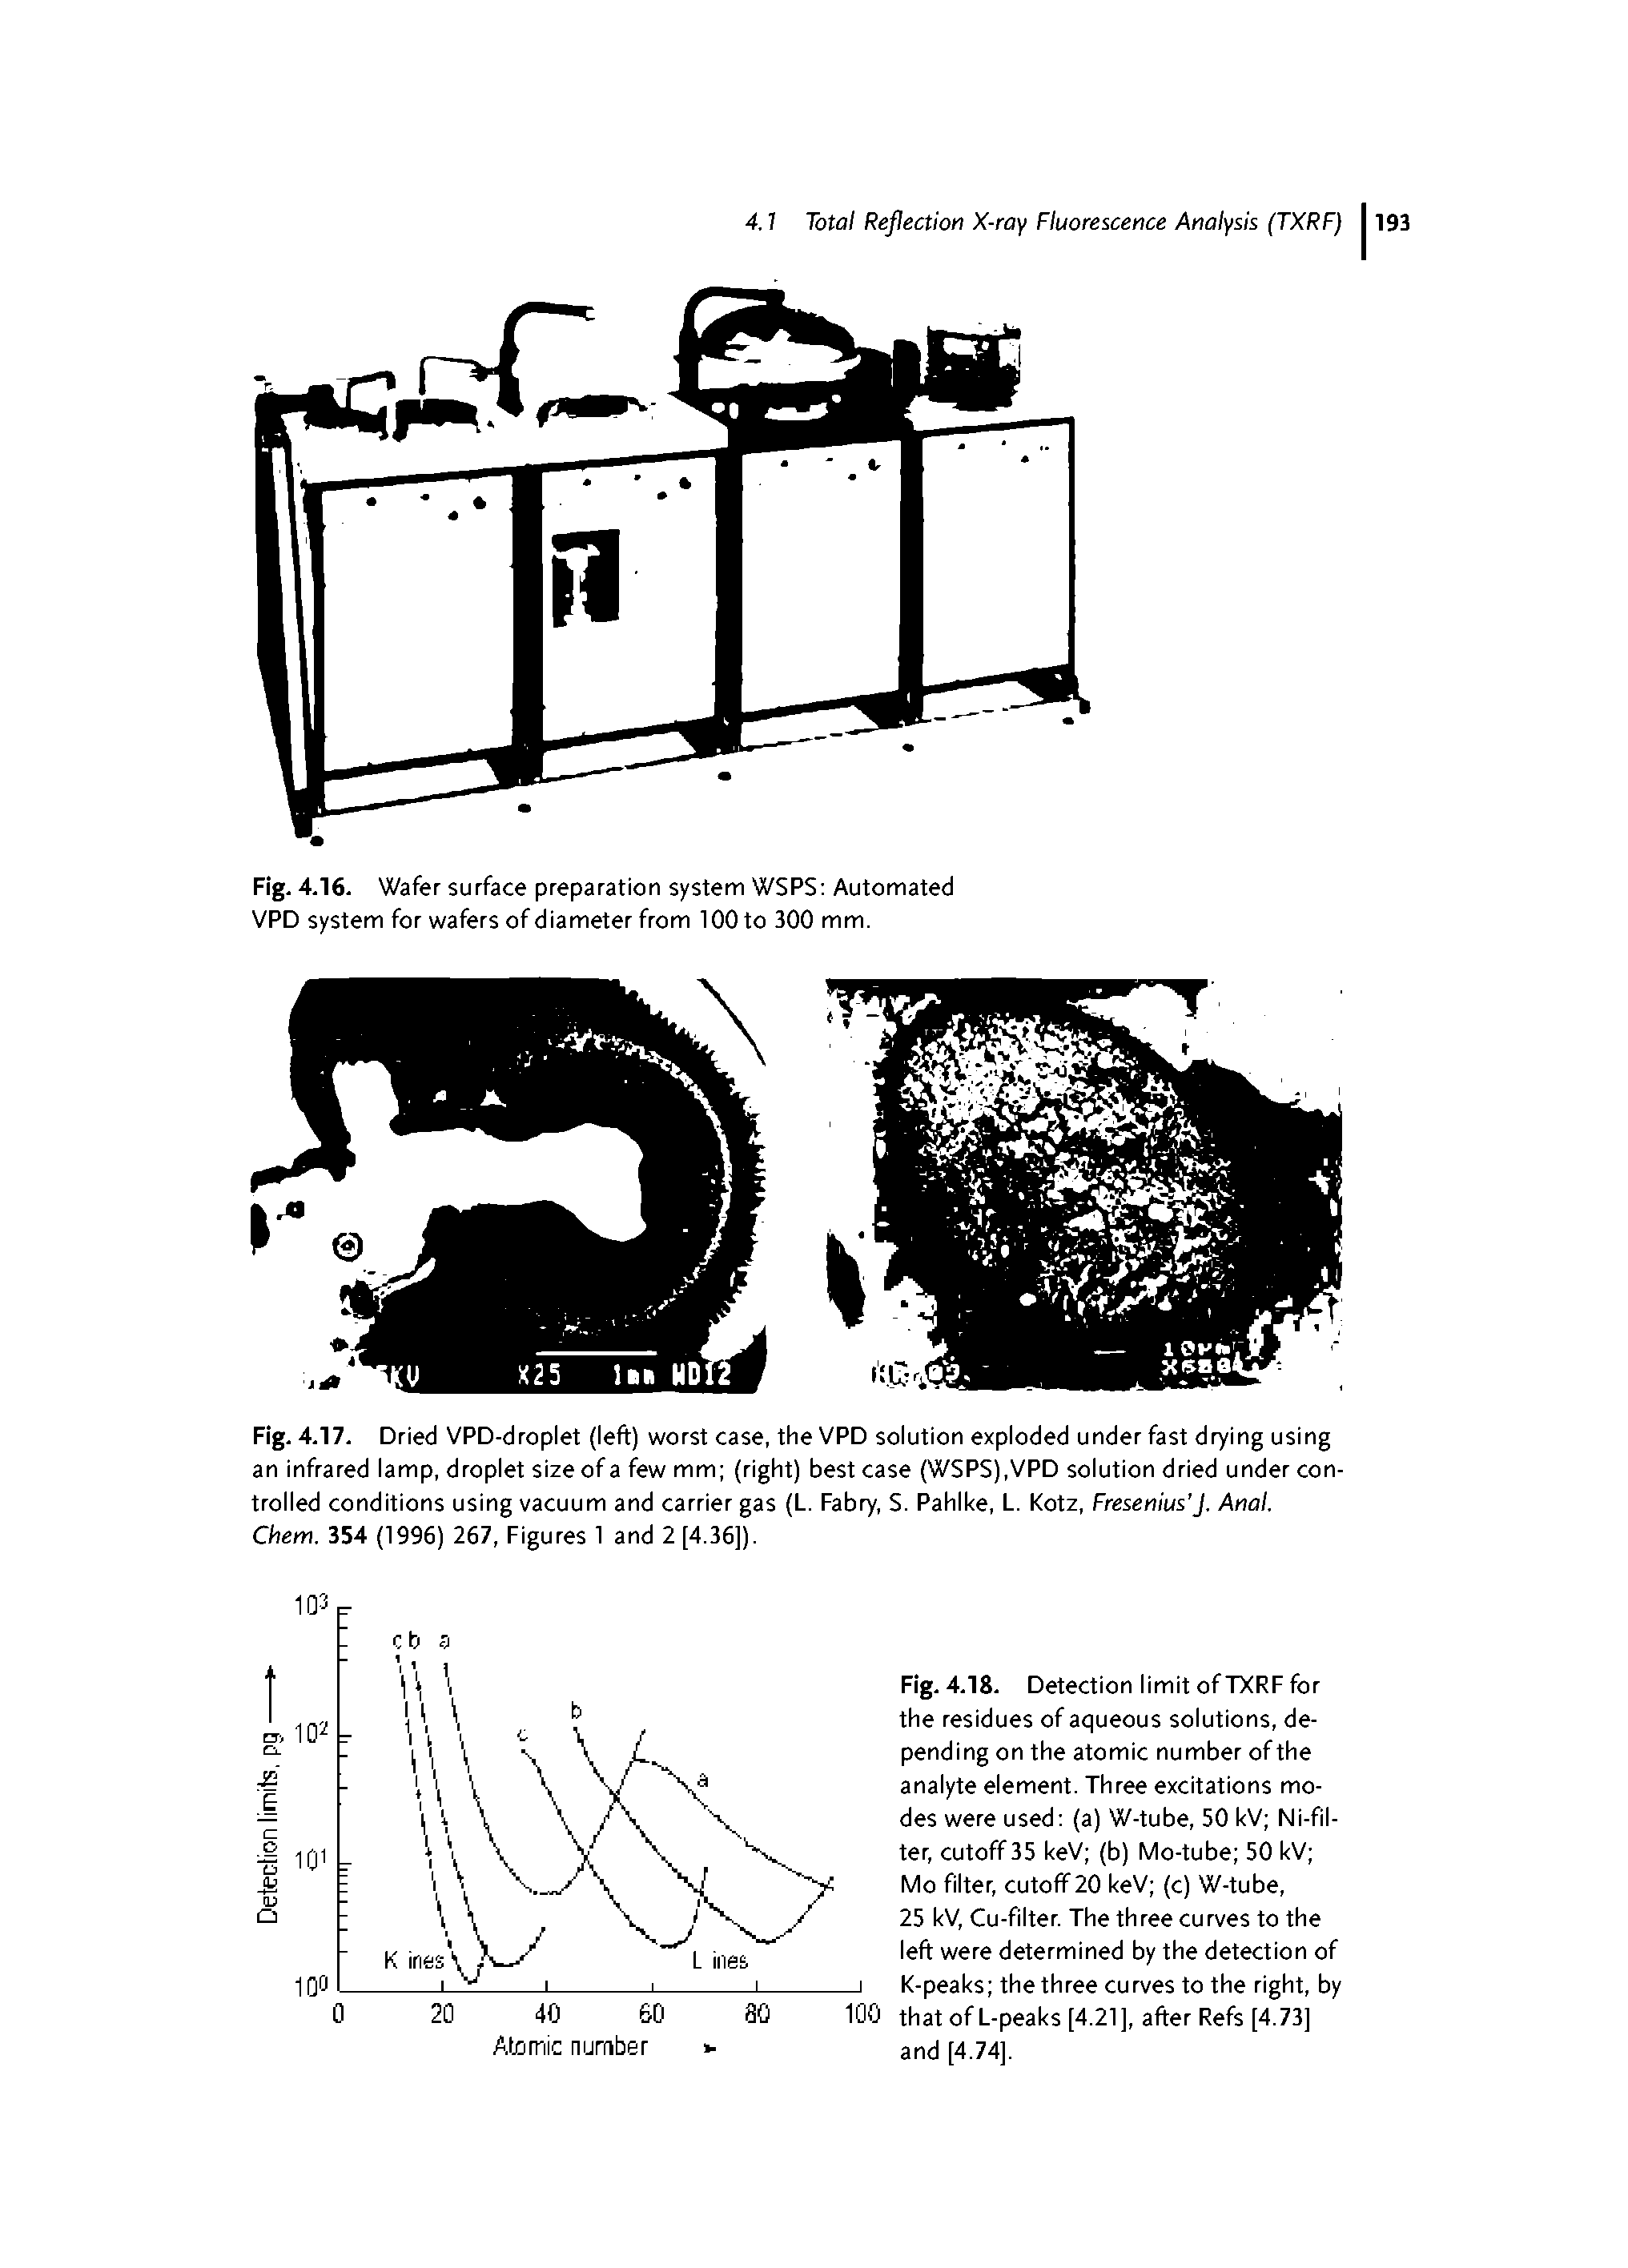 Fig. 4.17. Dried VPD-droplet (left) worst case, the VPD solution exploded under fast drying using an infrared lamp, droplet size of a few mm (right) best case (WSPS),VPD solution dried under controlled conditions using vacuum and carrier gas (L. Fabry, S. Pahike, L. Kotz, Fresenius J. Anal.